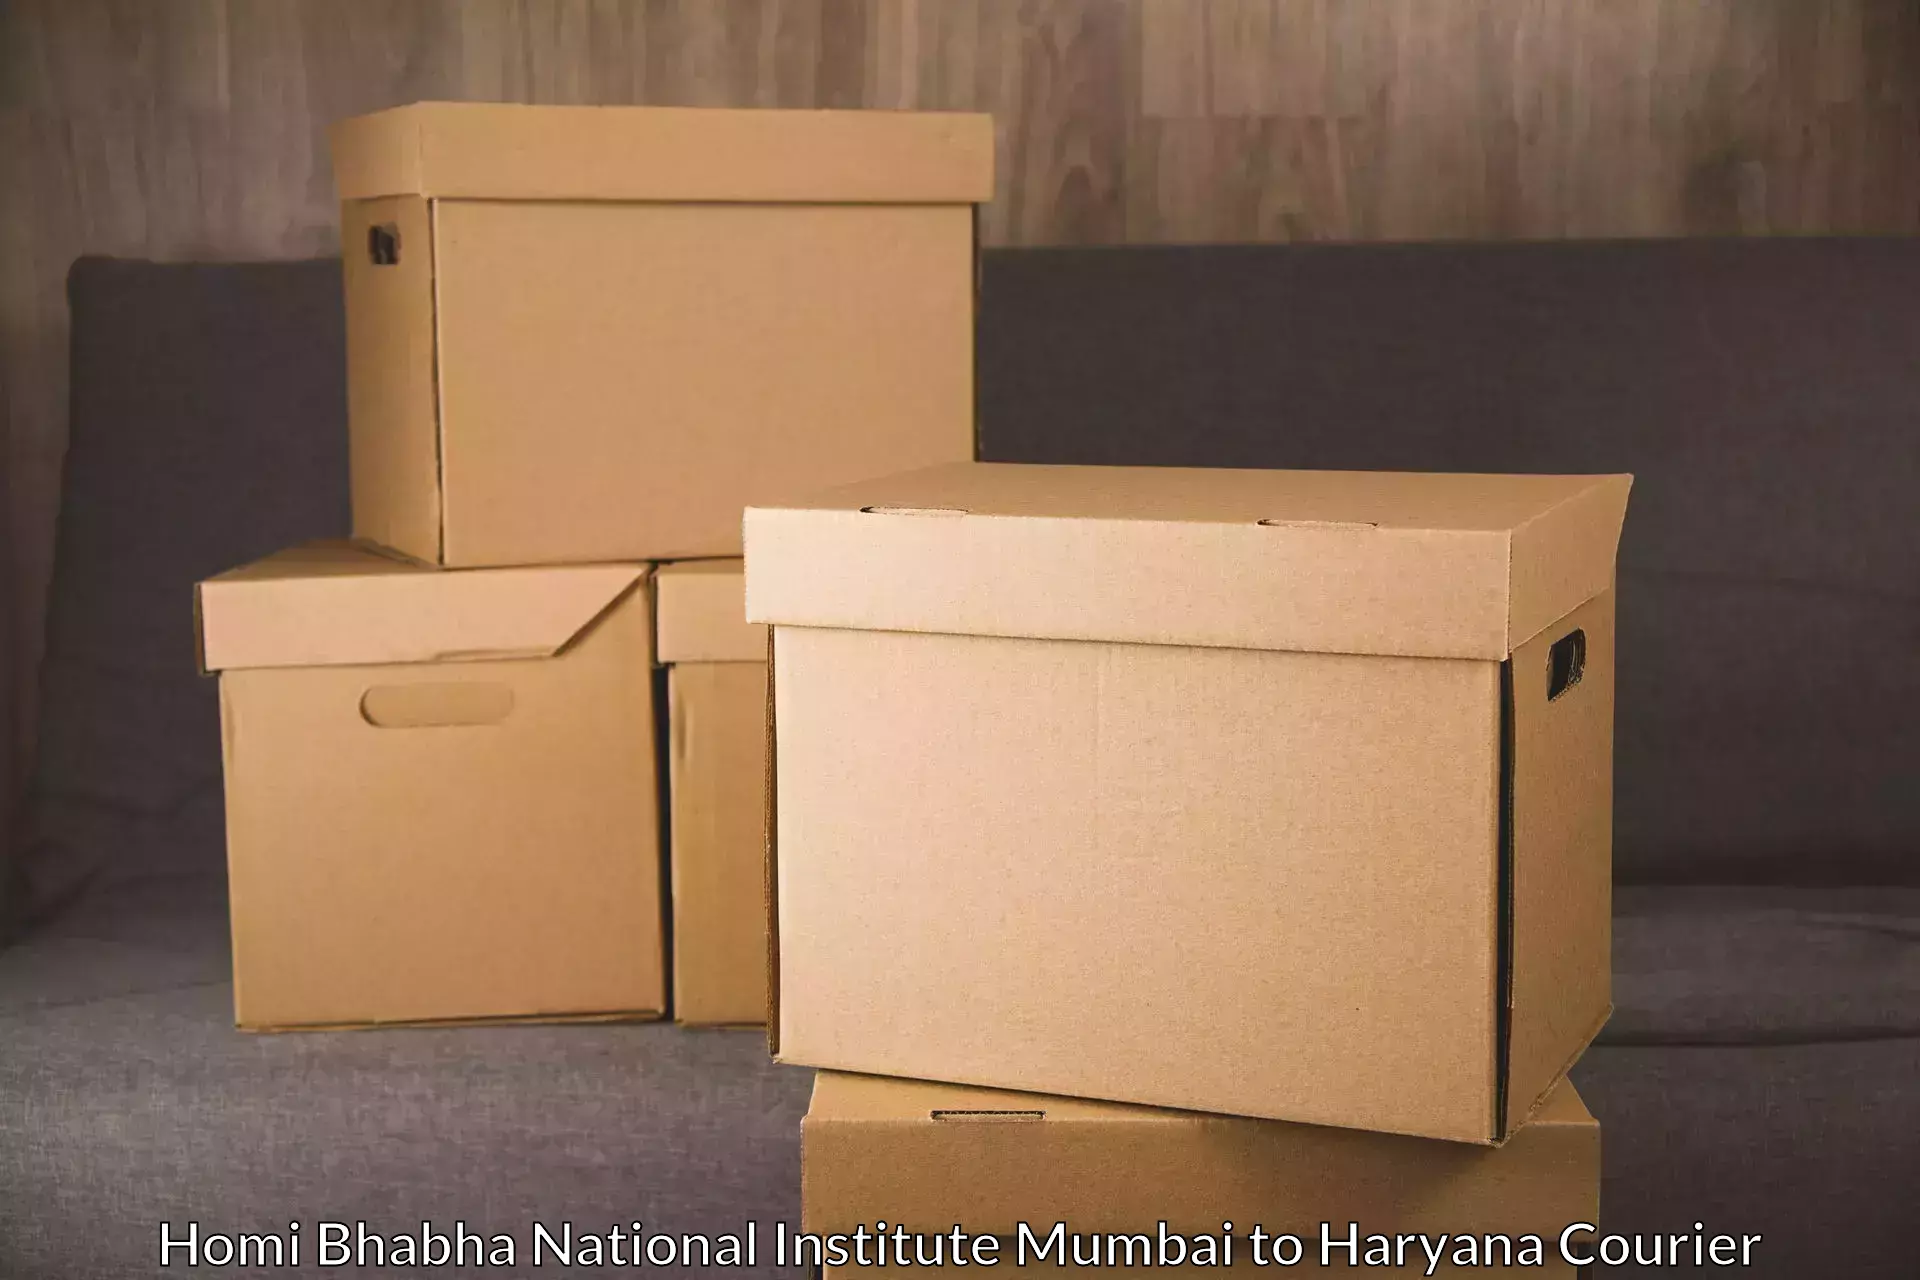 Package delivery network Homi Bhabha National Institute Mumbai to Sonipat